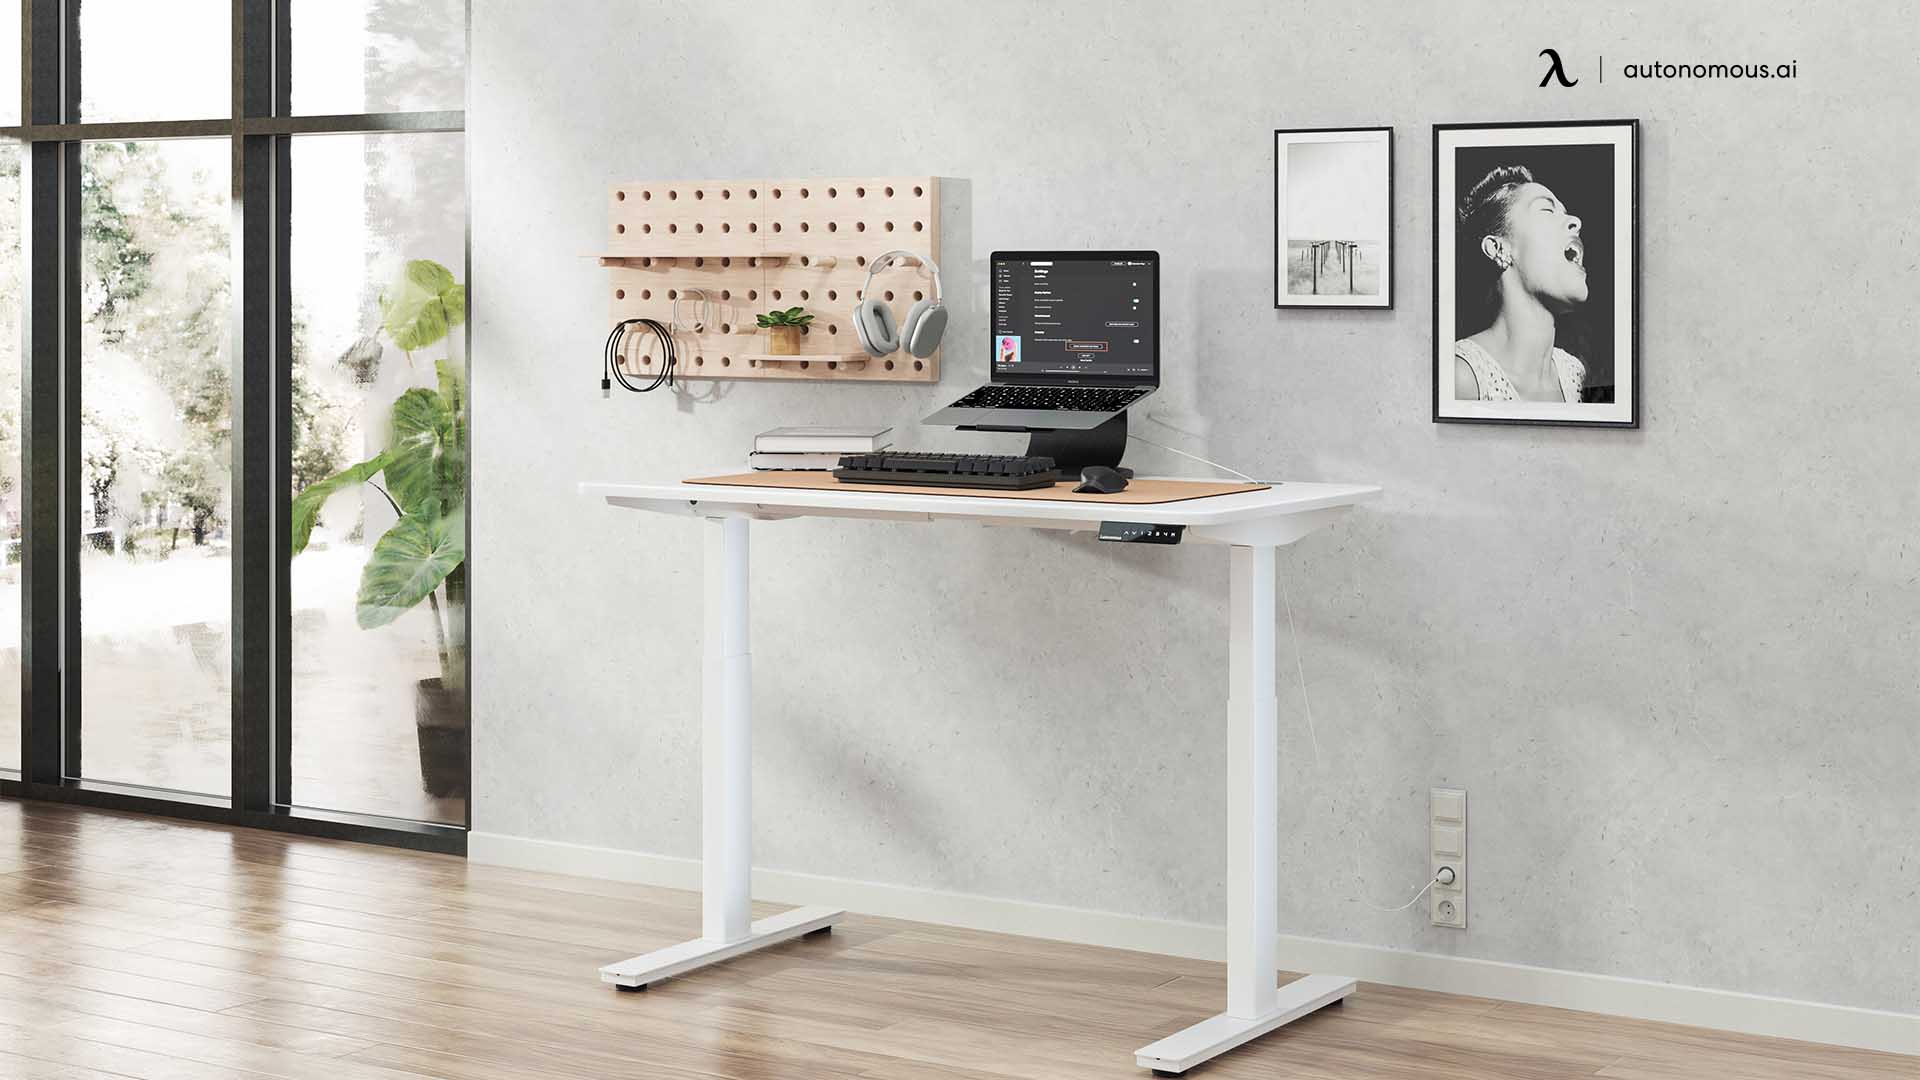 What are the benefits of using connected office accessories